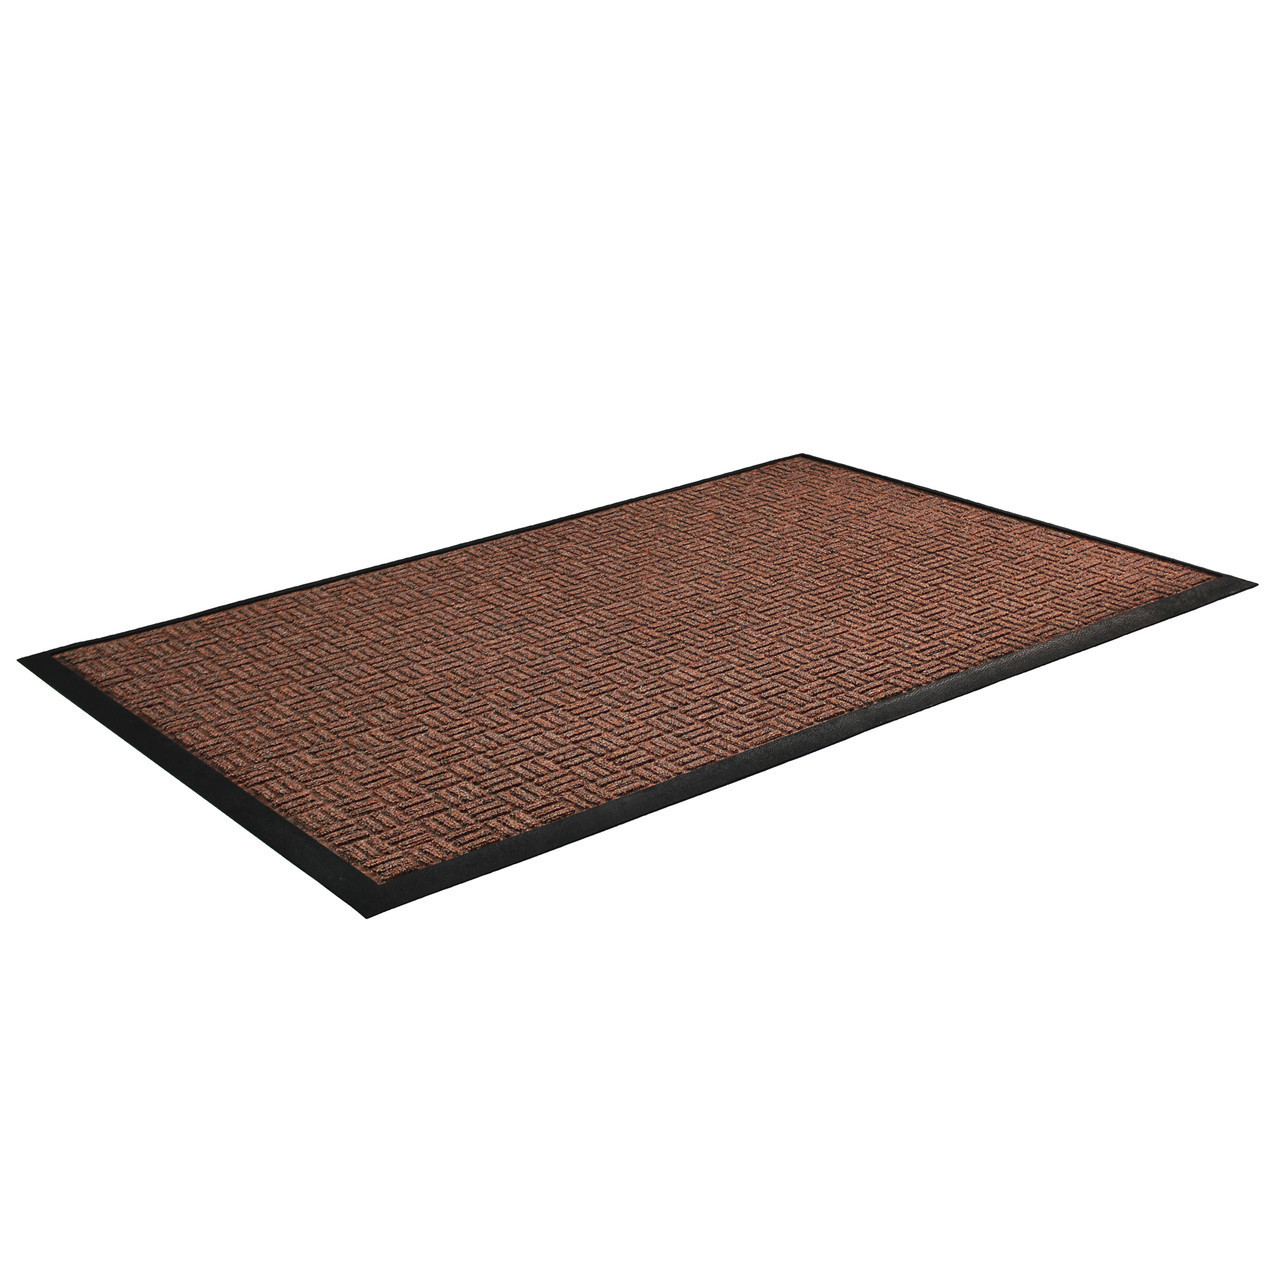 https://cdn11.bigcommerce.com/s-fjwps1jbkv/images/stencil/1280x1280/products/346/2895/ultralux-premium-indoor-outdoor-entrance-mat-or-absorbent-strong-anti-slip-entry-rug-heavy-duty-doormat-or-brown__02024.1688986717.jpg?c=2?imbypass=on